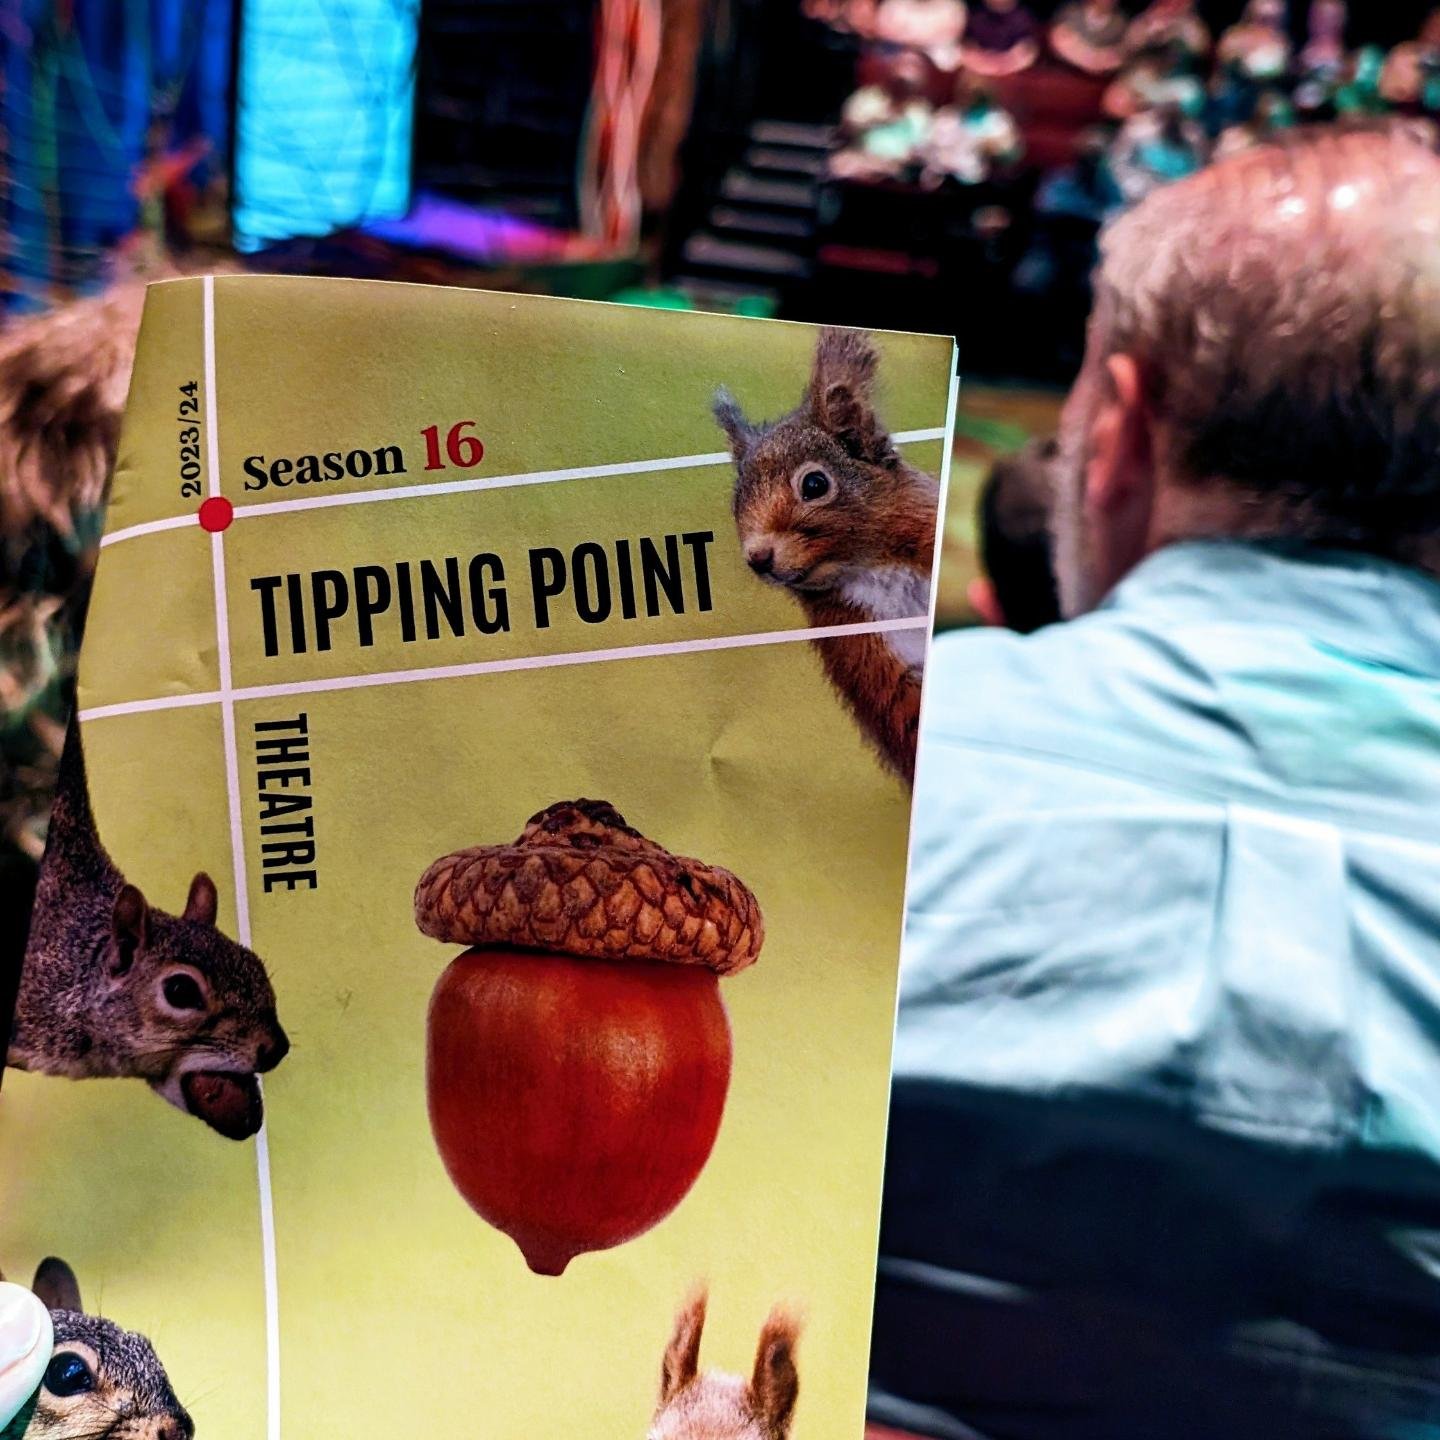 Posted this quickly yesterday and failed to include the show title...and tag @markdmessersmith
.
Saw a fantastic production of &quot;The Squirrels&quot; at @tippingpointtheatre.  Loved it from top to bottom. Especially enjoyed seeing my old friend @d